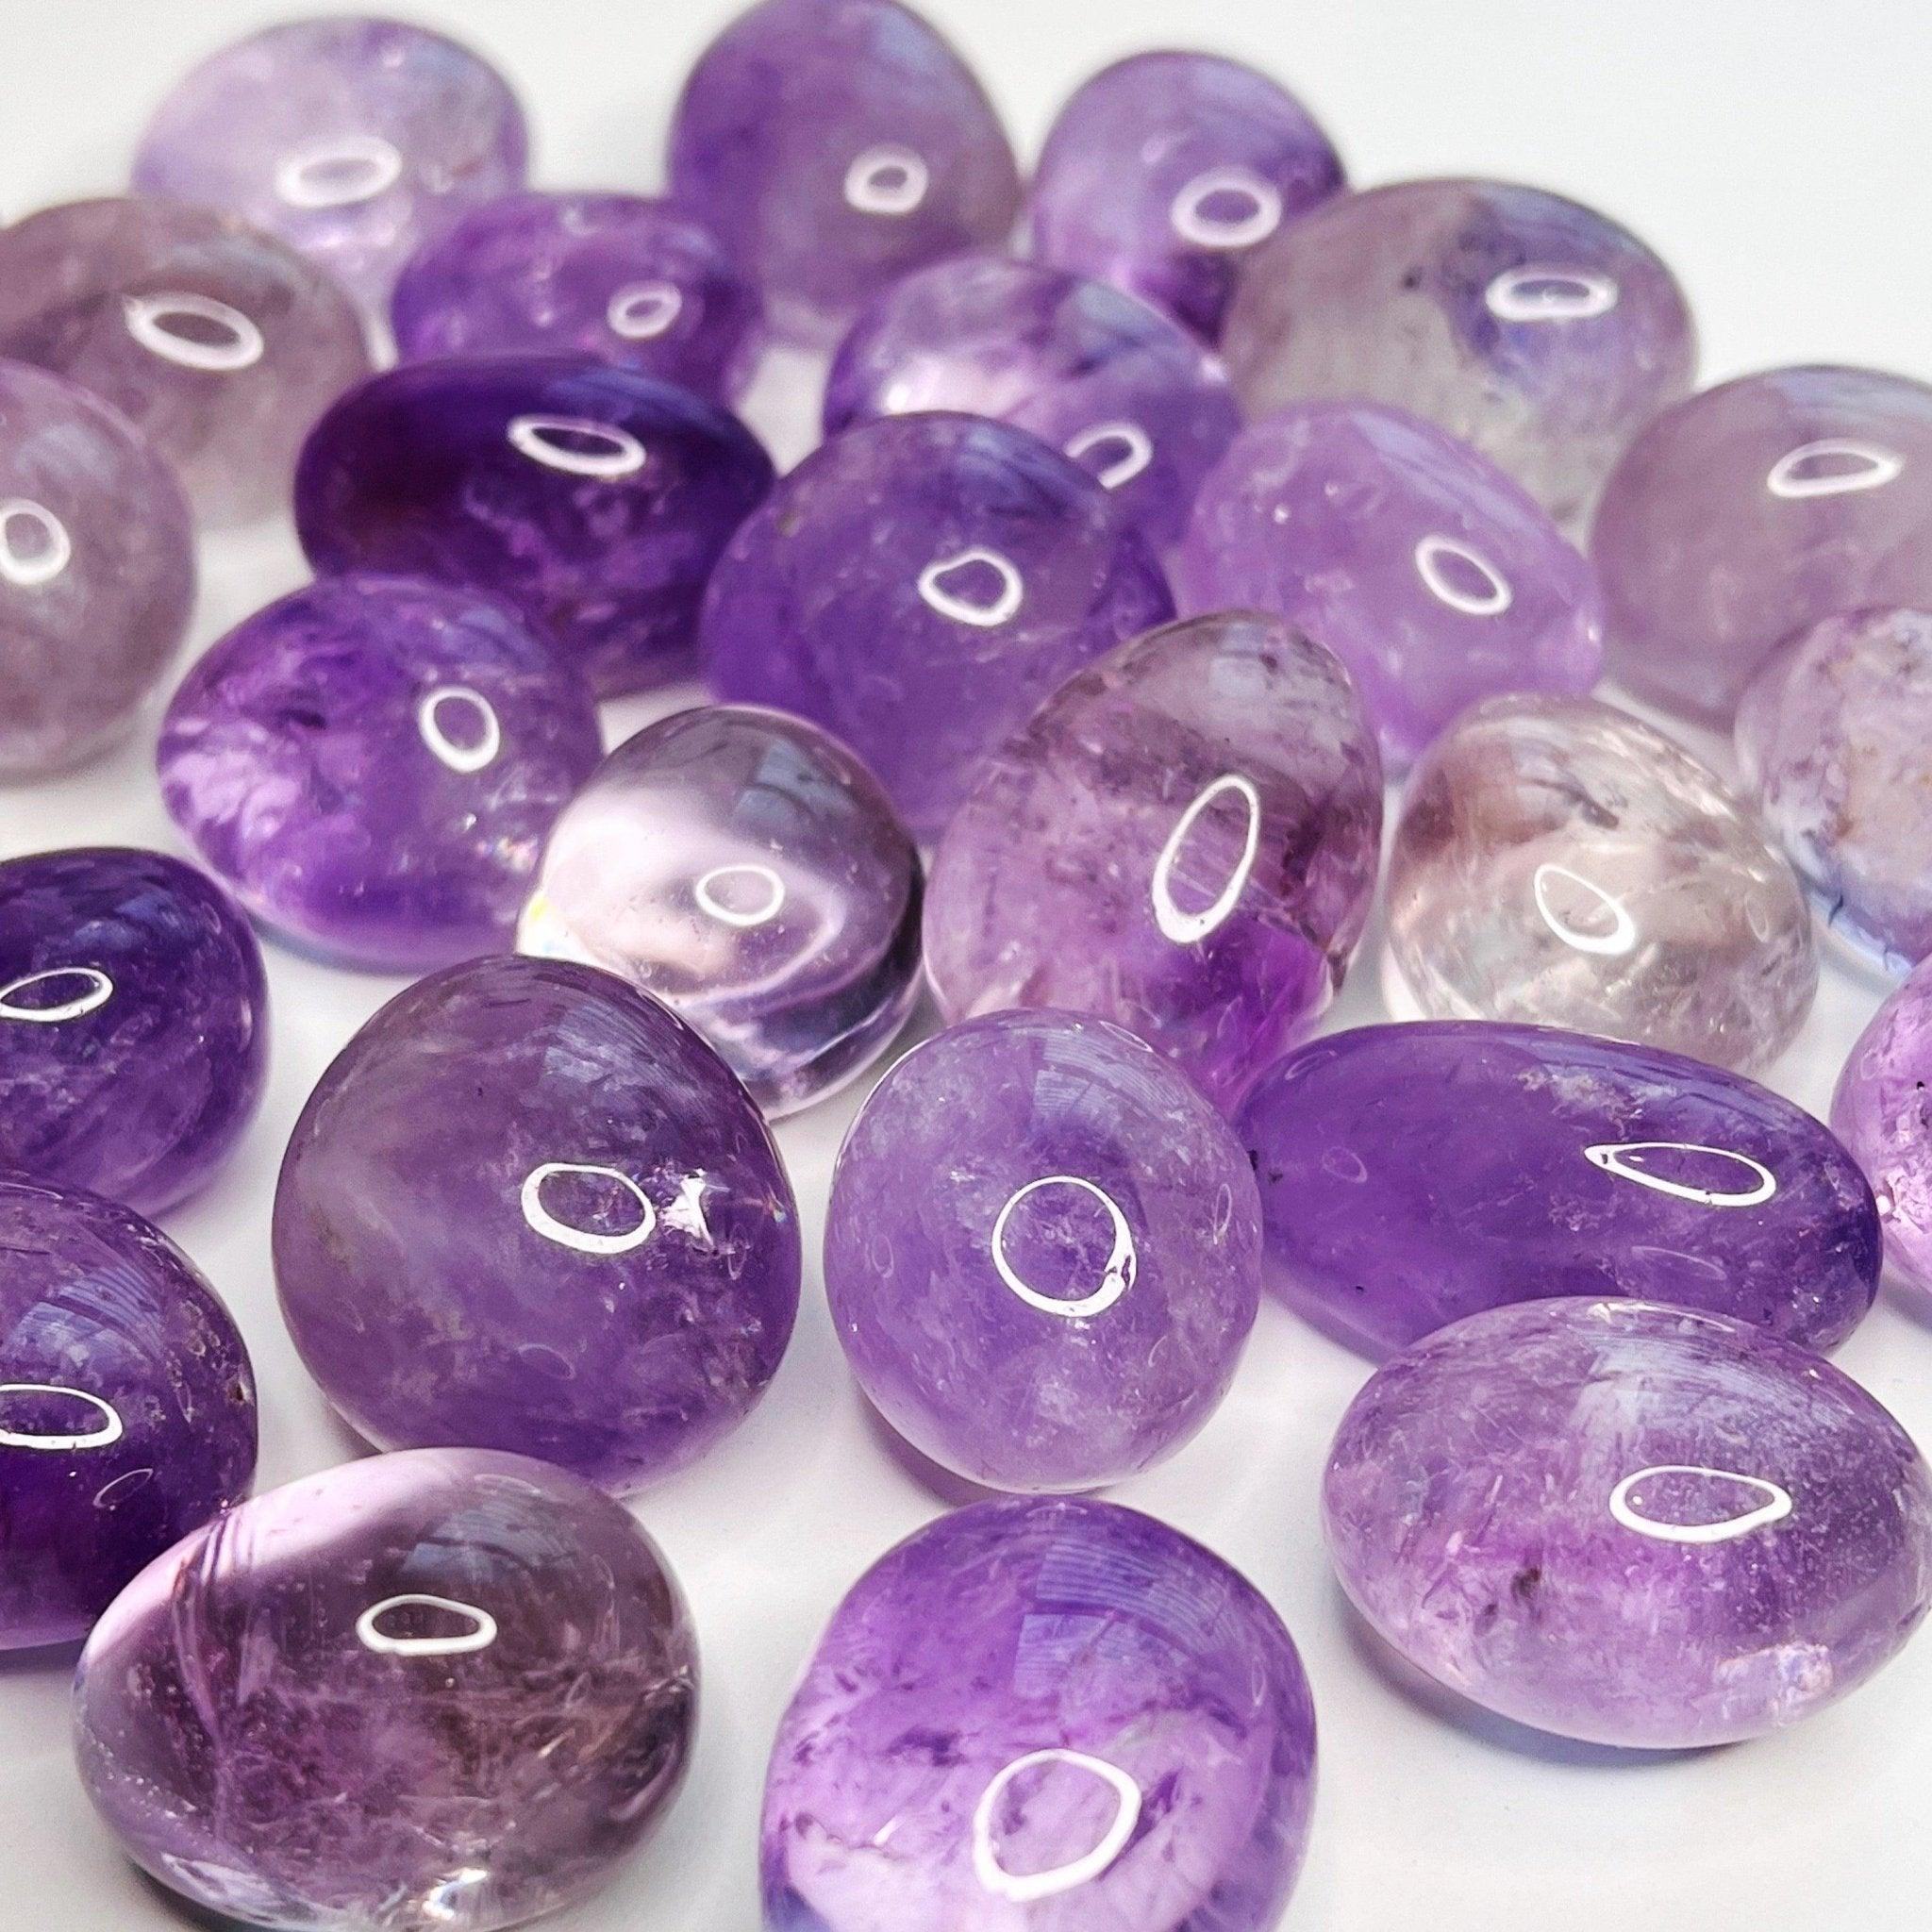 GEMMY AMETHYST CHONK - 33 bday, 444 sale, amethyst, bulk, chonky, emotional support, end of year sale, gemmy amethyst, grief gift bundle, holiday sale, new year sale, pocket crystal, pocket stone, protection gift bundle, spring equinox, tumble, valentine's day - The Mineral Maven